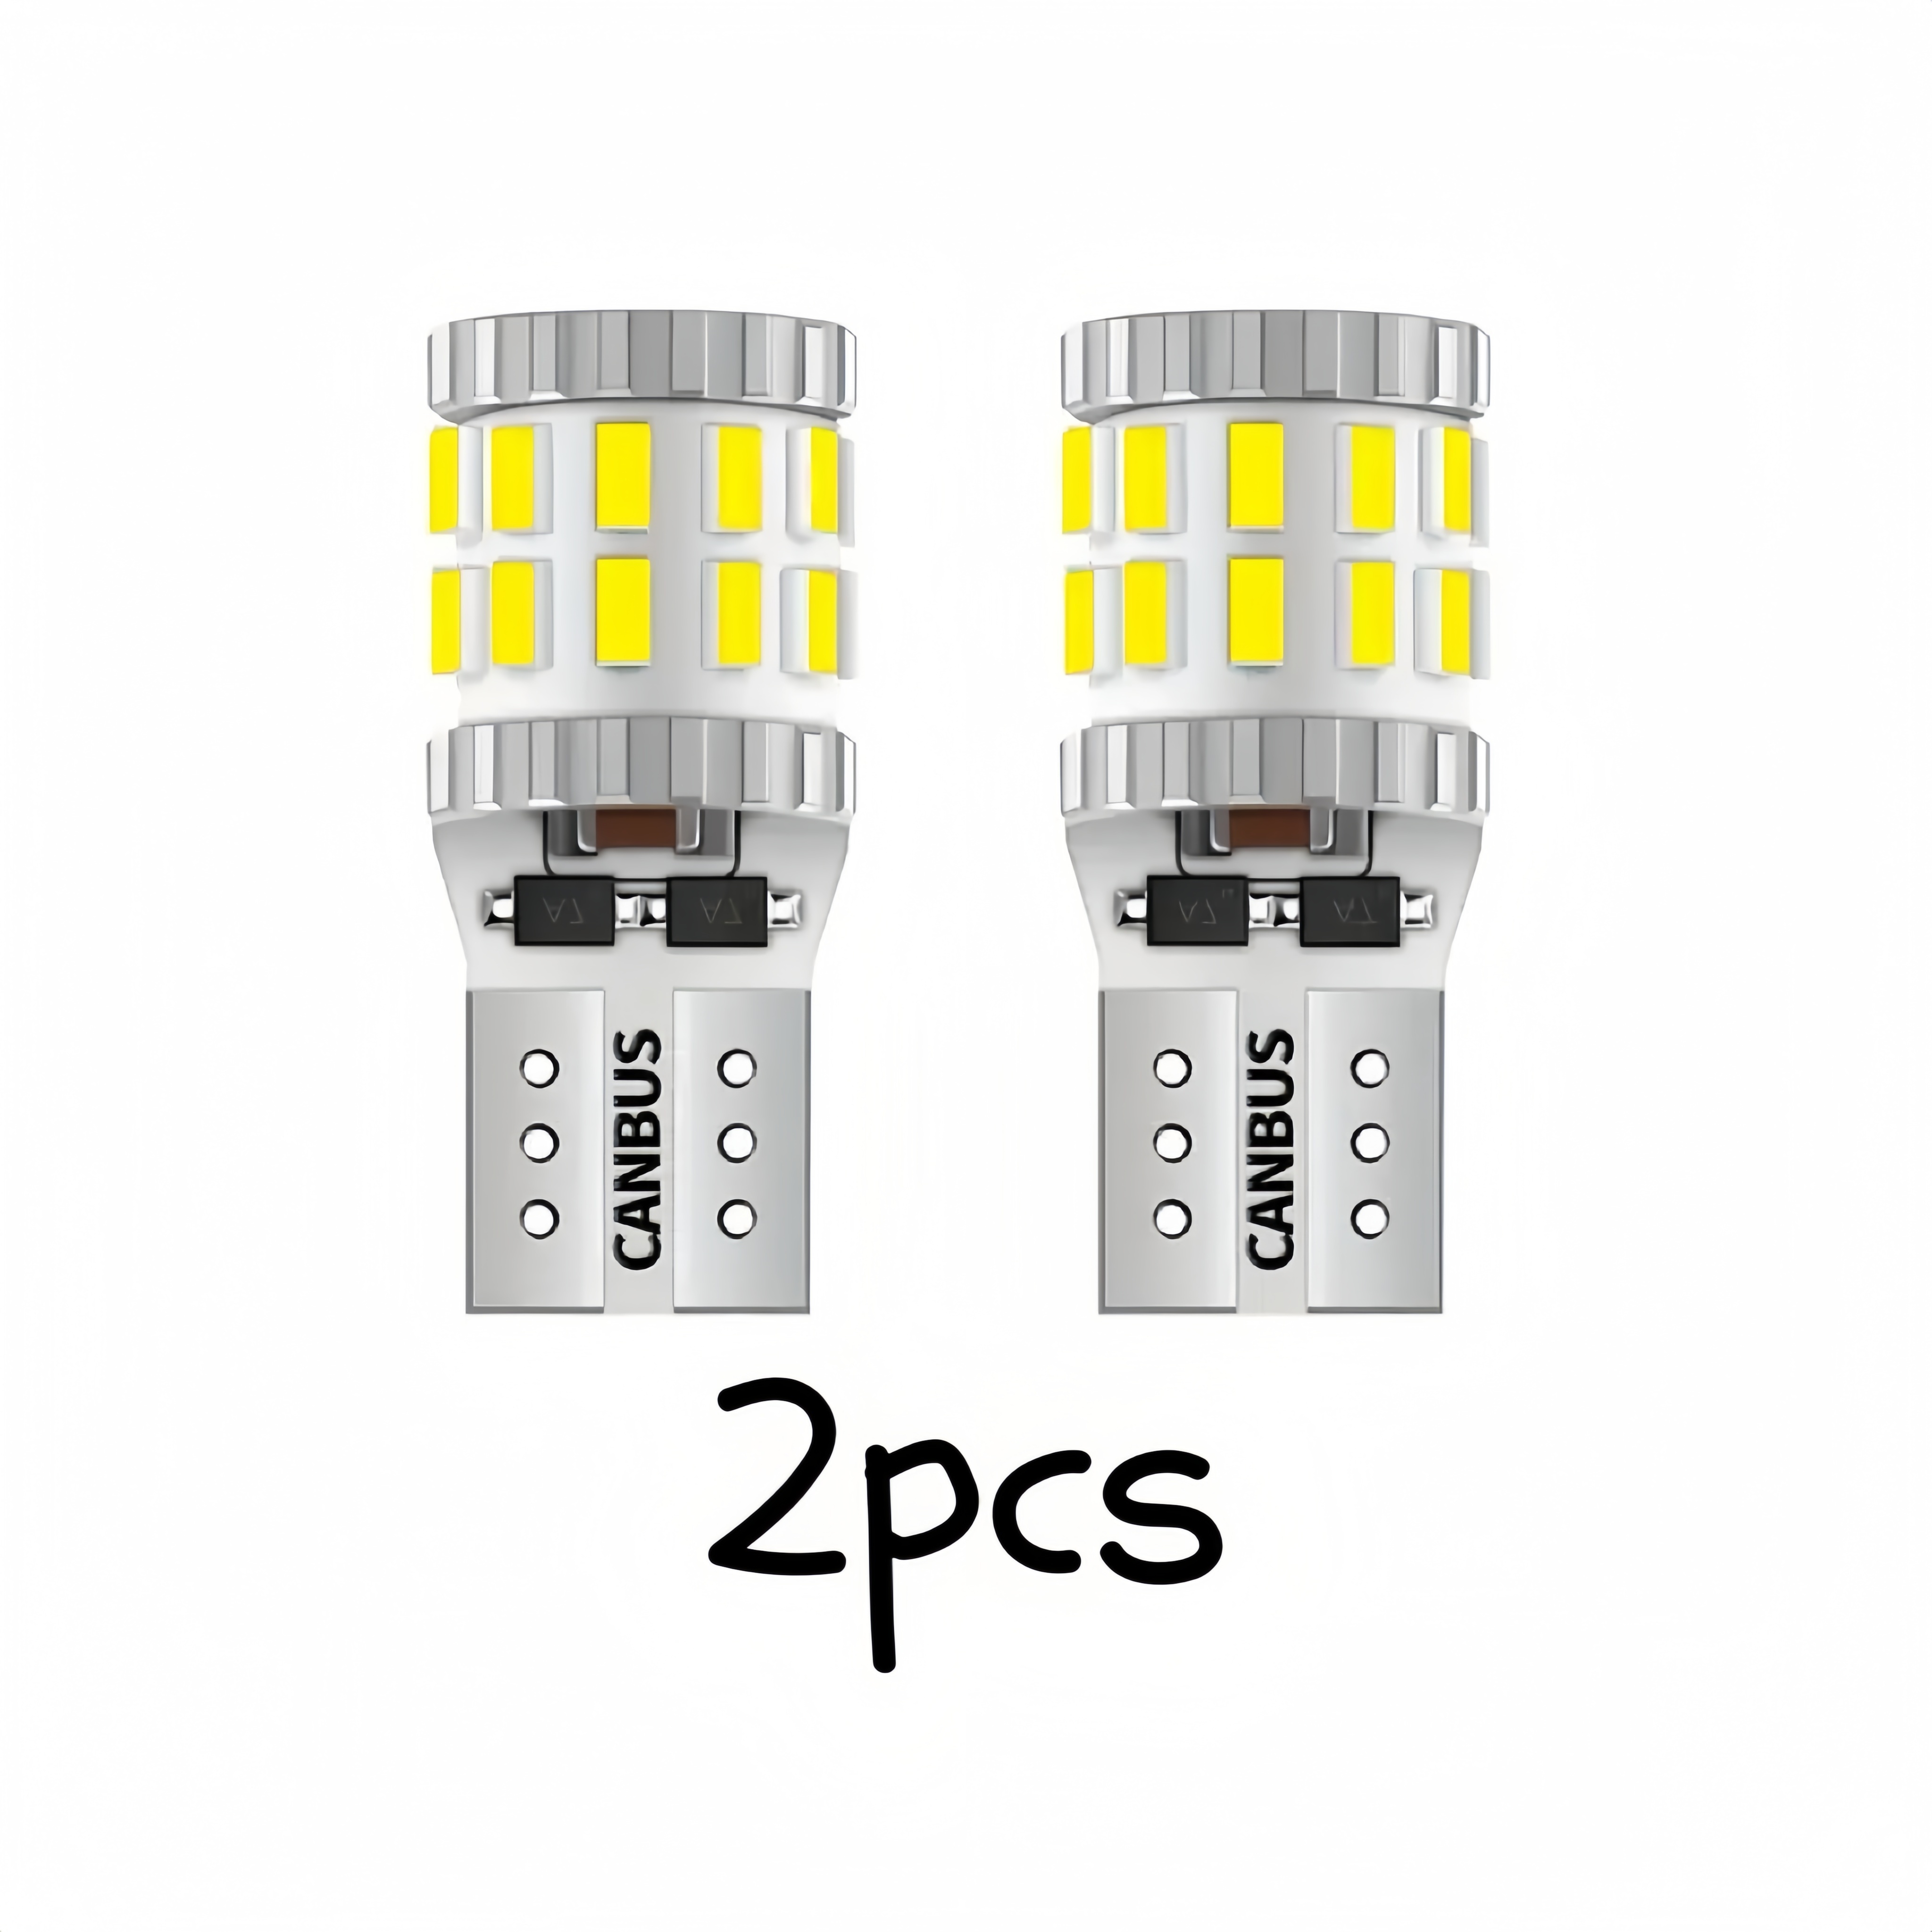 

2pcs 194 Led Bulbs White Canbus Error Free 168 2825 T10w5w Led Light Bulbs For License Plate Lights Car Interiorlights Dome Map Light 30-smd